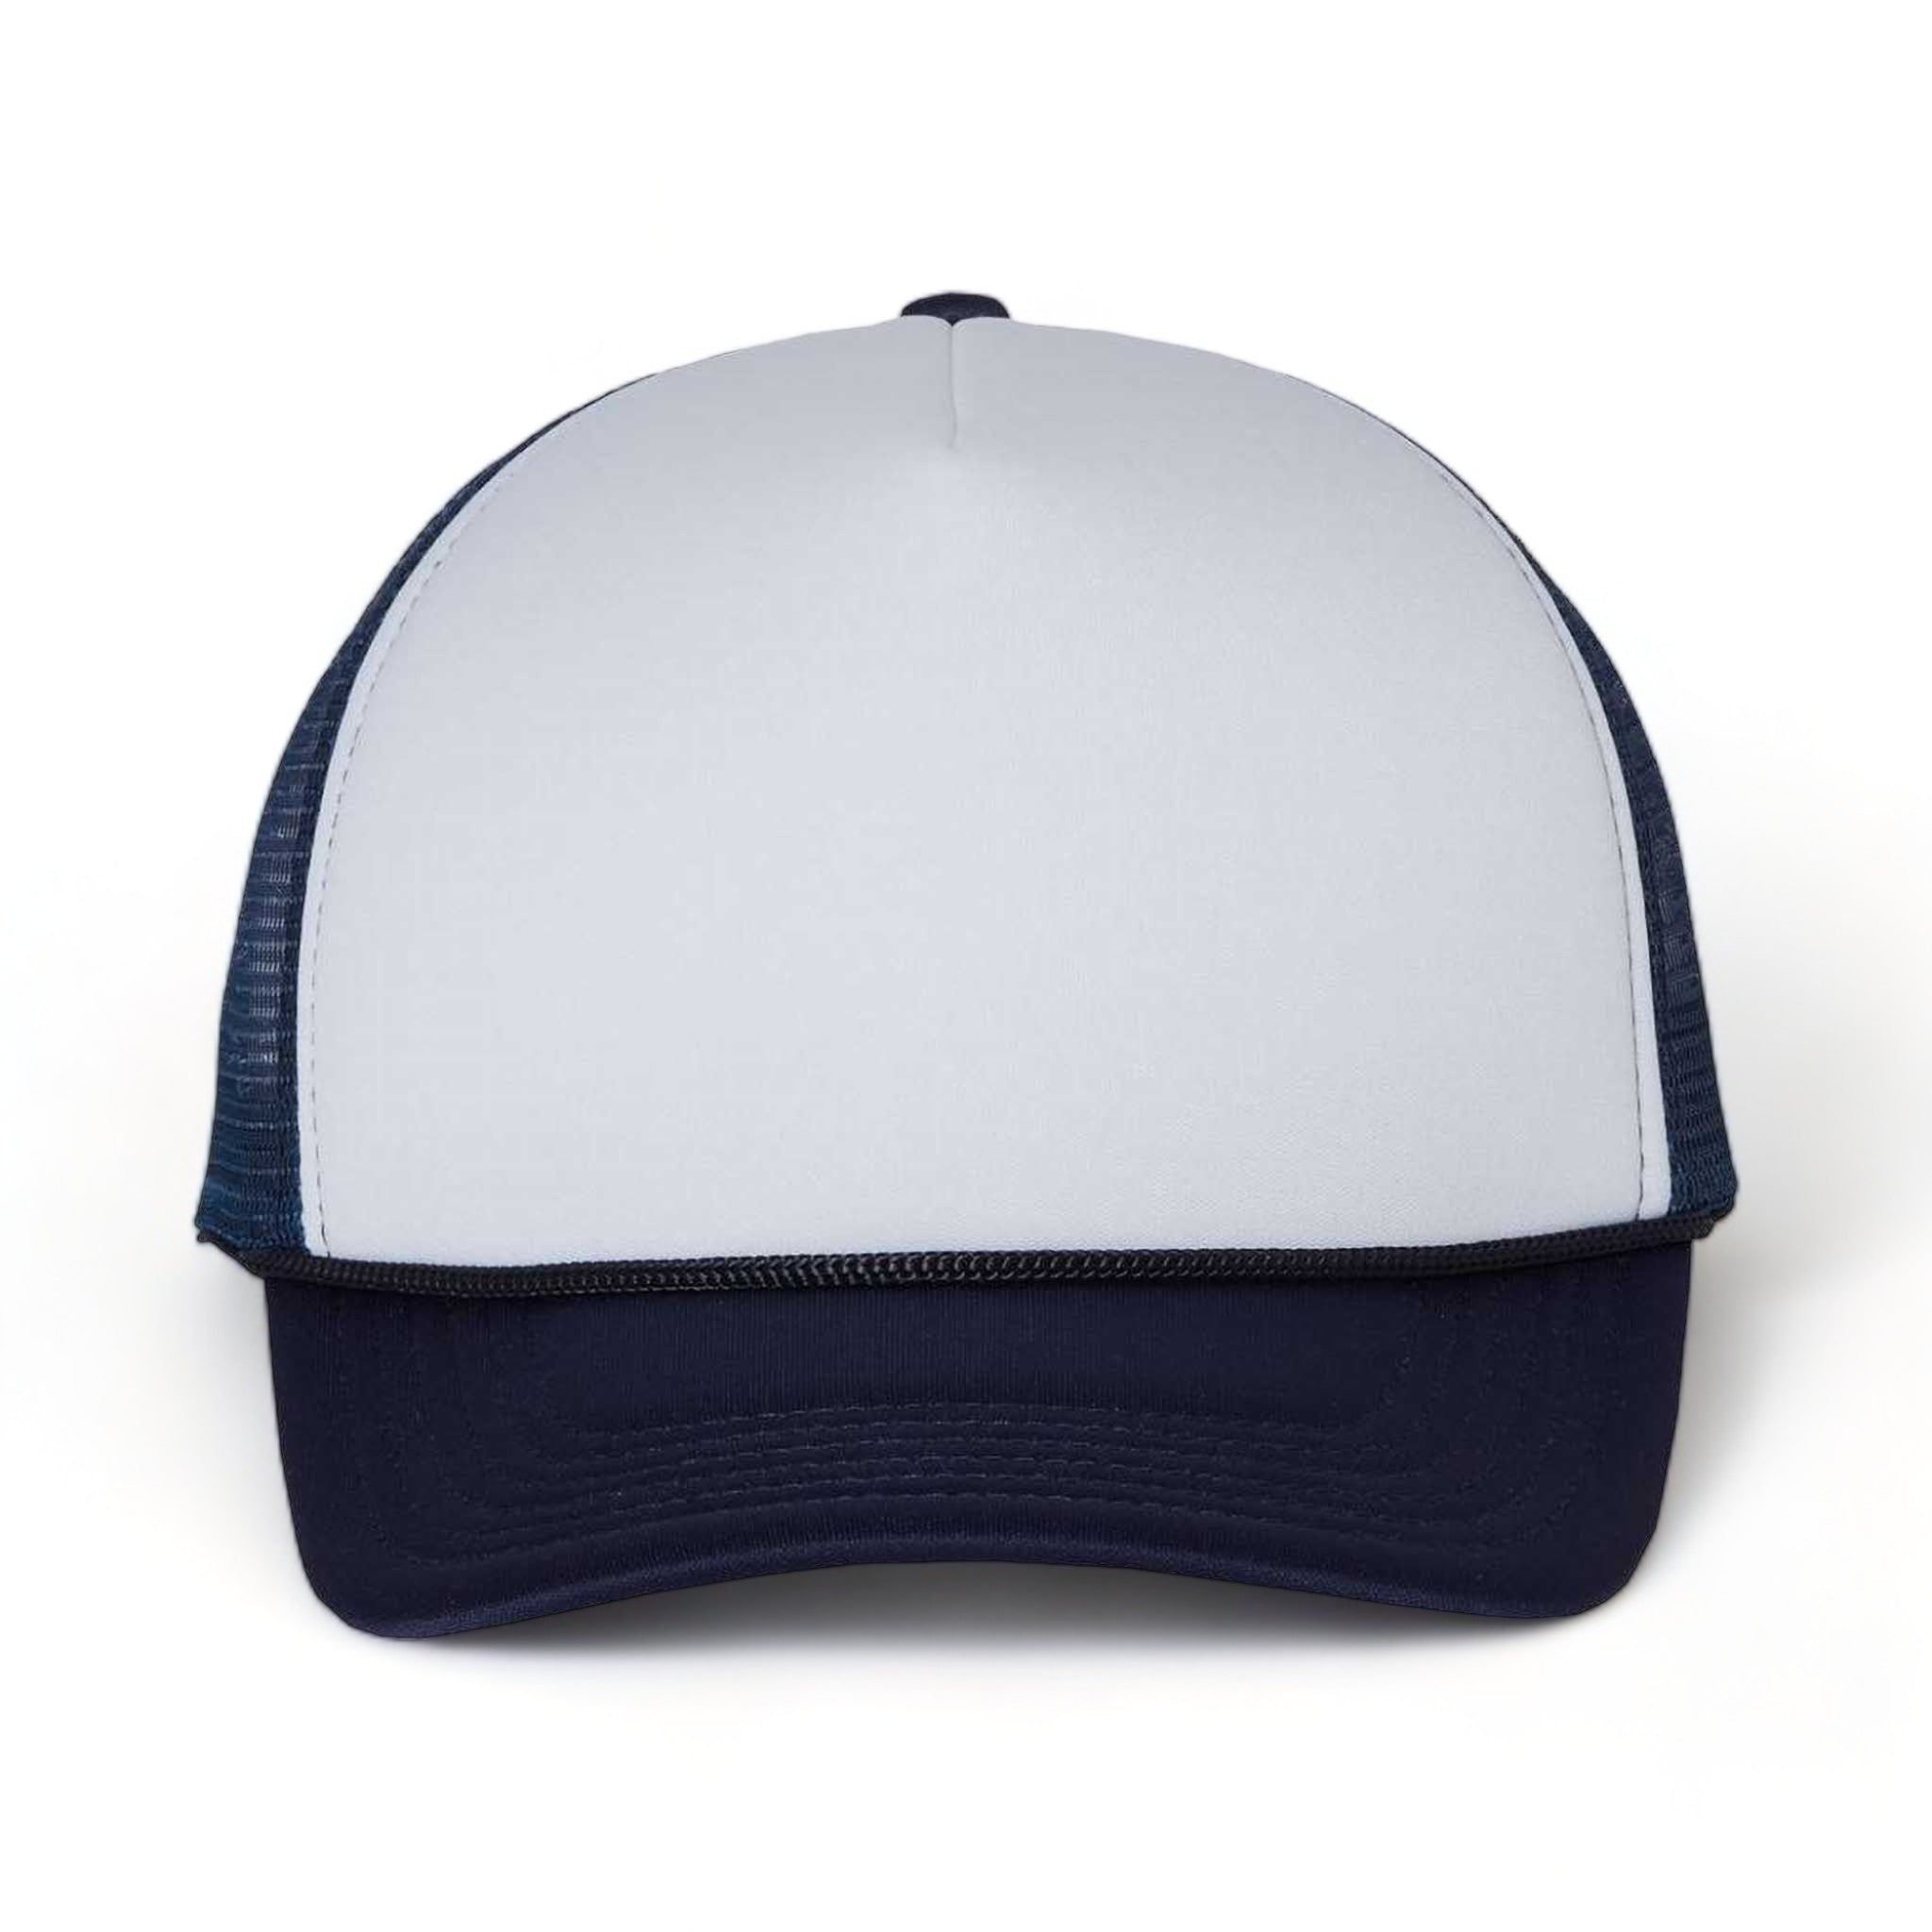 Front view of Valucap VC700 custom hat in white and navy